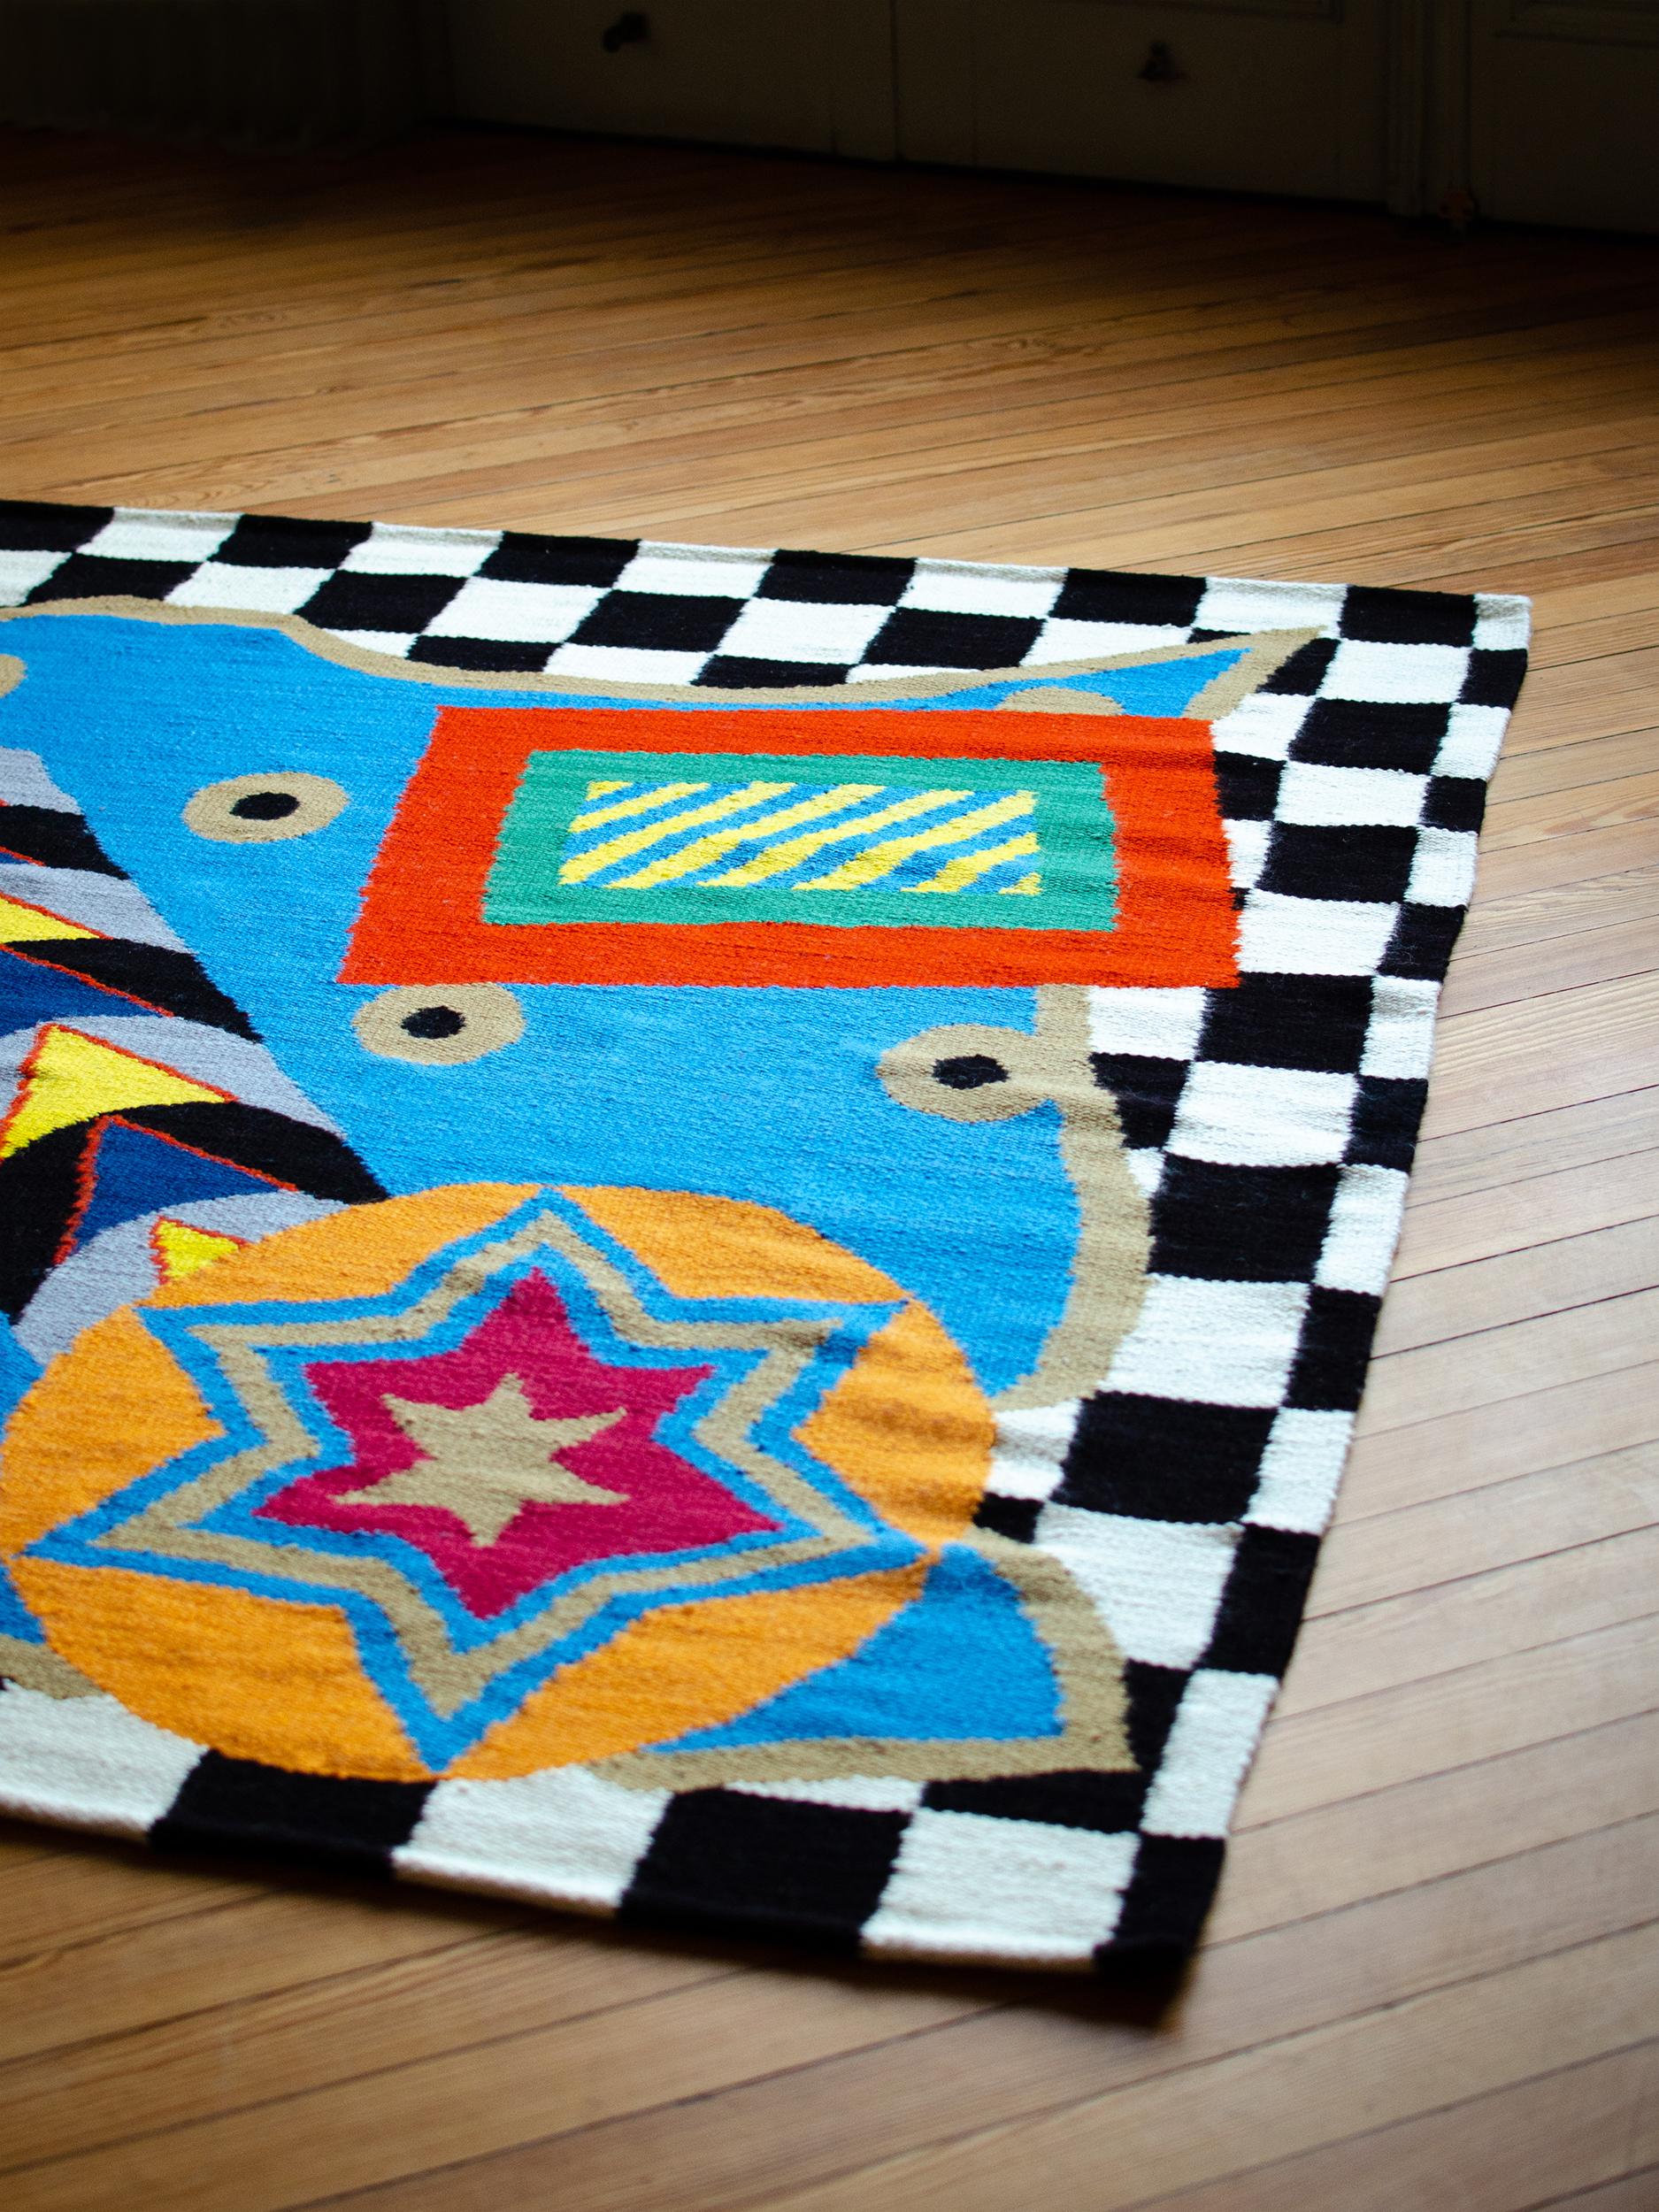 Adapted from the original artwork by Juan Stoppani & Jean-Yves Legavre, Chess, 2019.

LALANA RUGS is an applied arts initiative born from the desire to combine proposals by contemporary artists with traditional local techniques and noble materials.